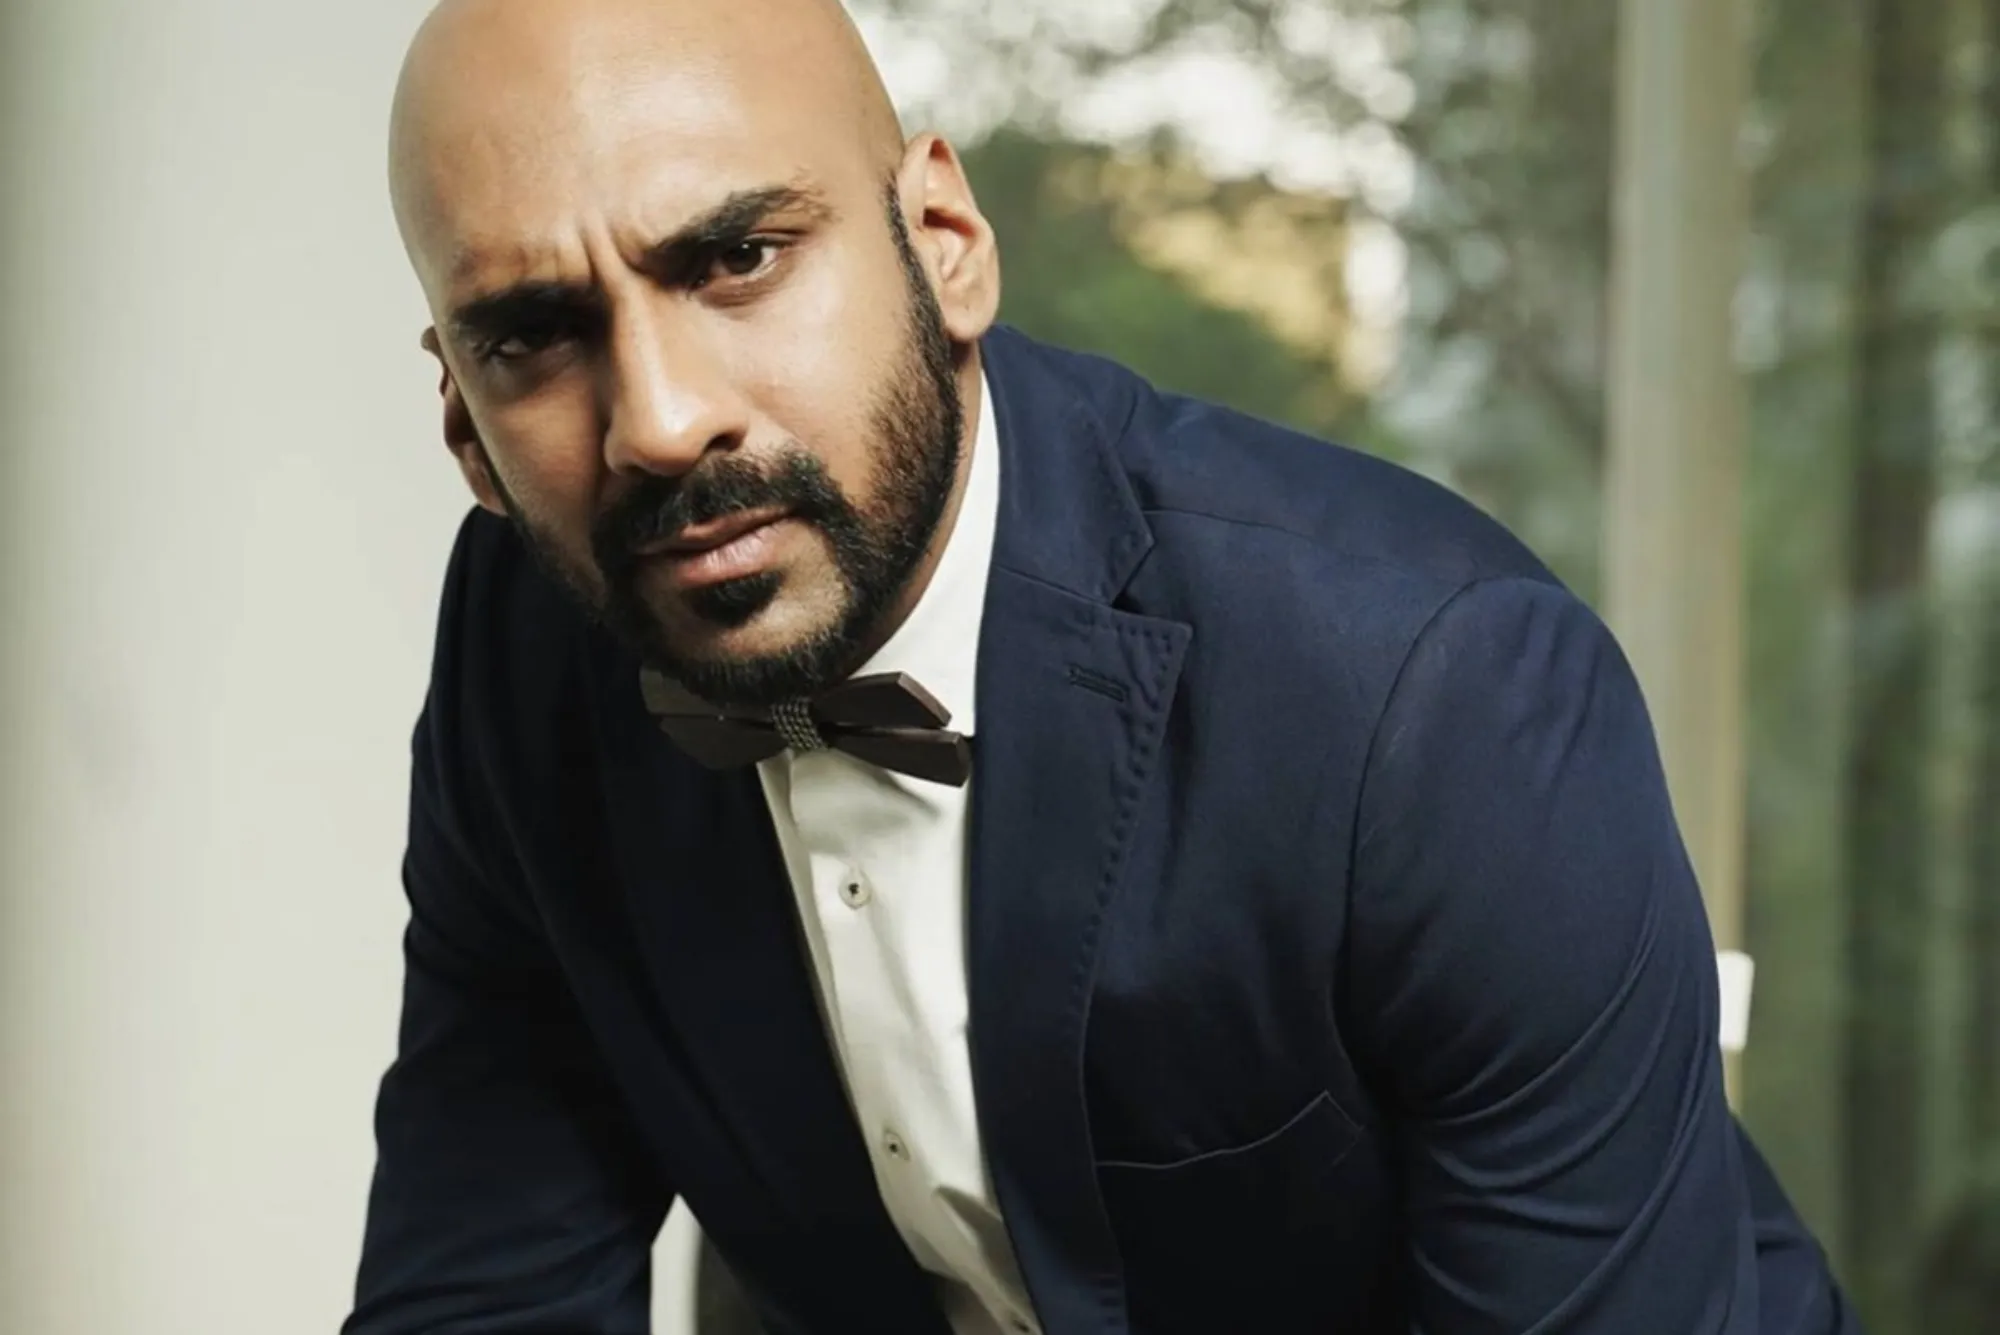 Bald Celebrities in India: A Look at Iconic Stars | Solas Entertainment Services